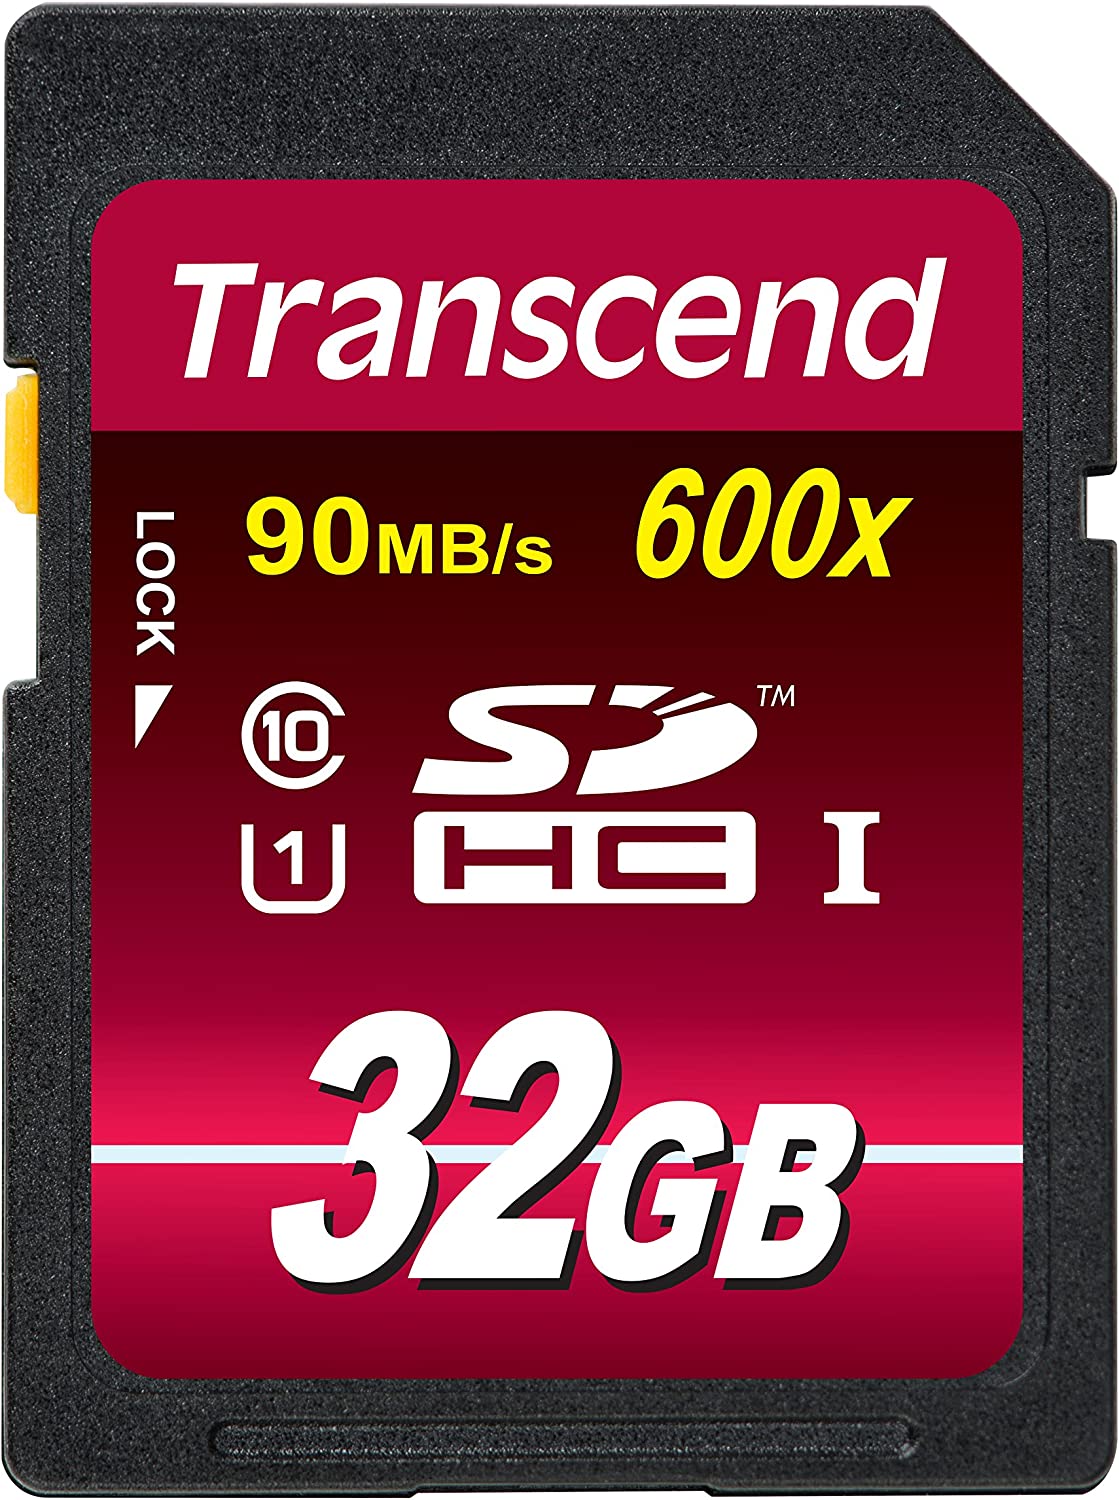 Transcend 32GB SDHC Class 10 UHS-1 Flash Memory Card Up to 90MB/s (TS32GSDHC10U1) 32 GB Standard Packaging